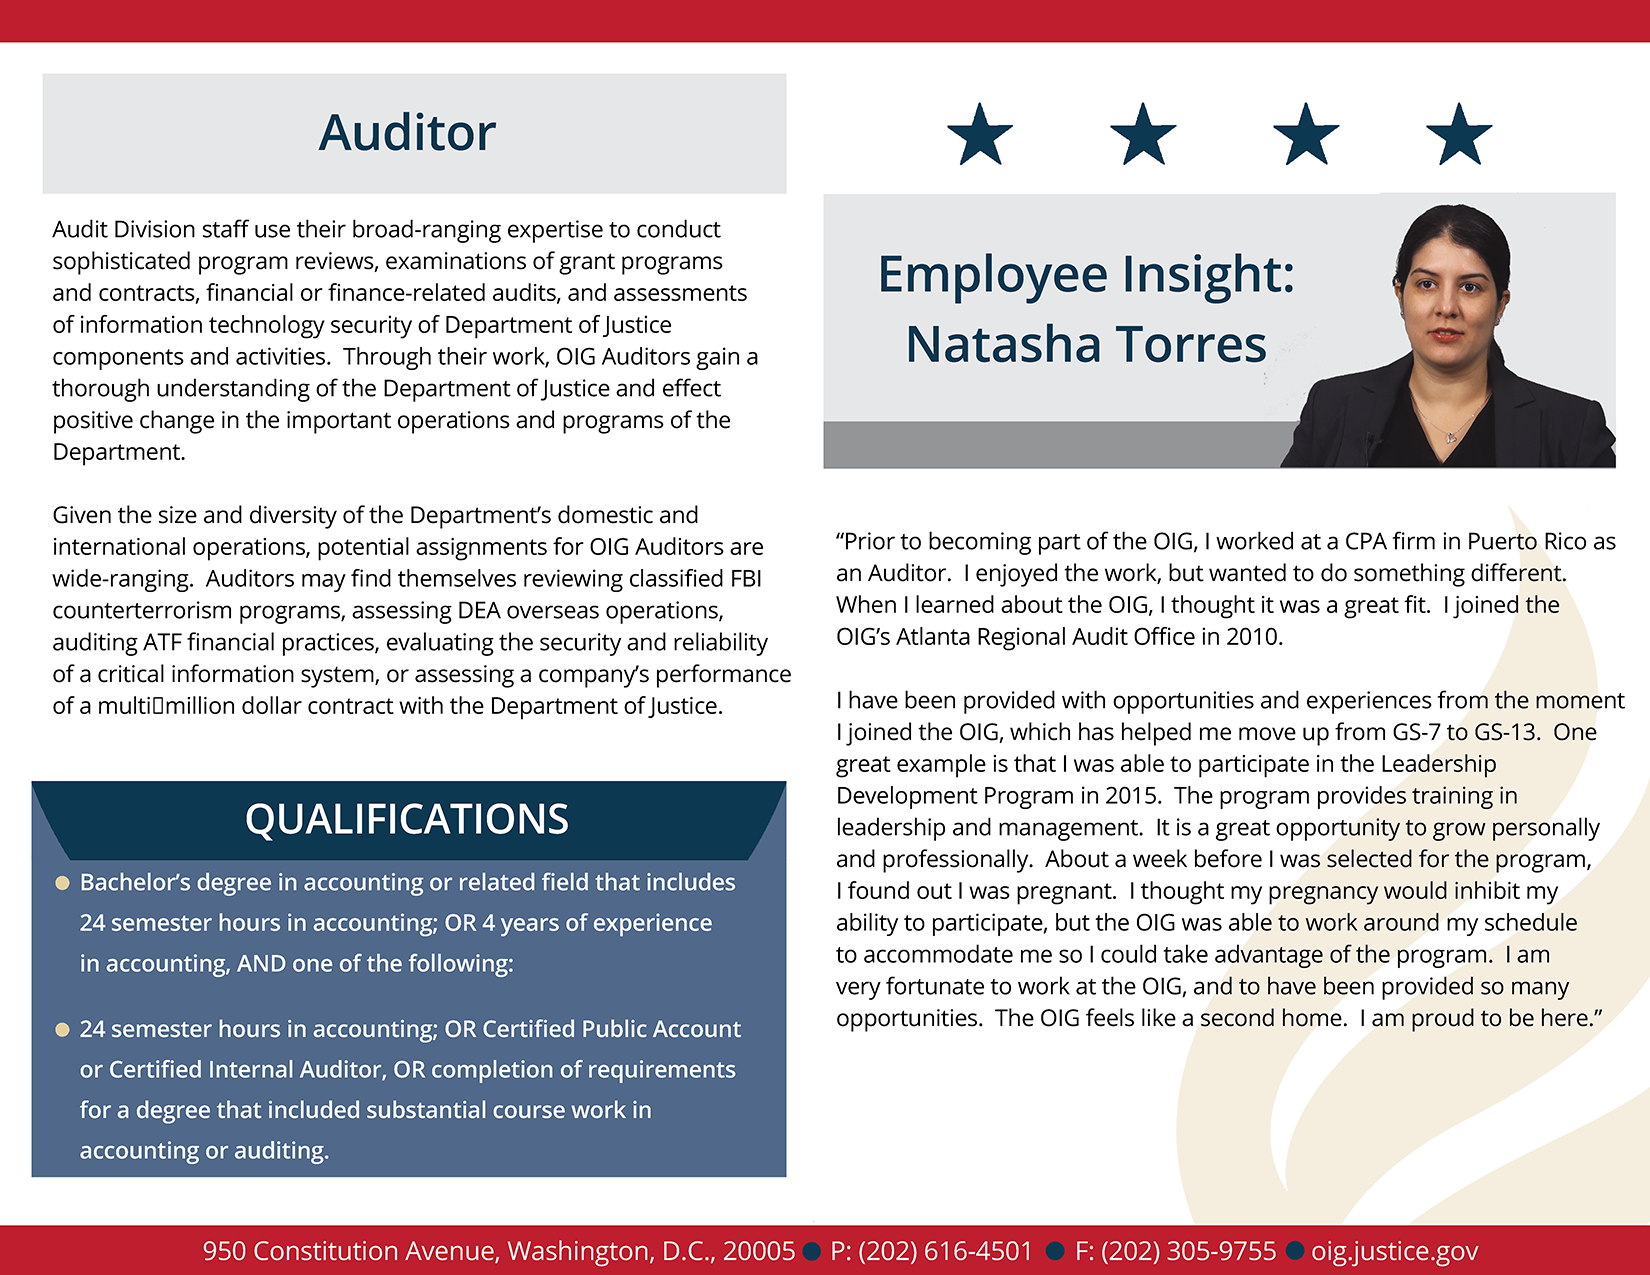 Learn more about the auditor employee experience